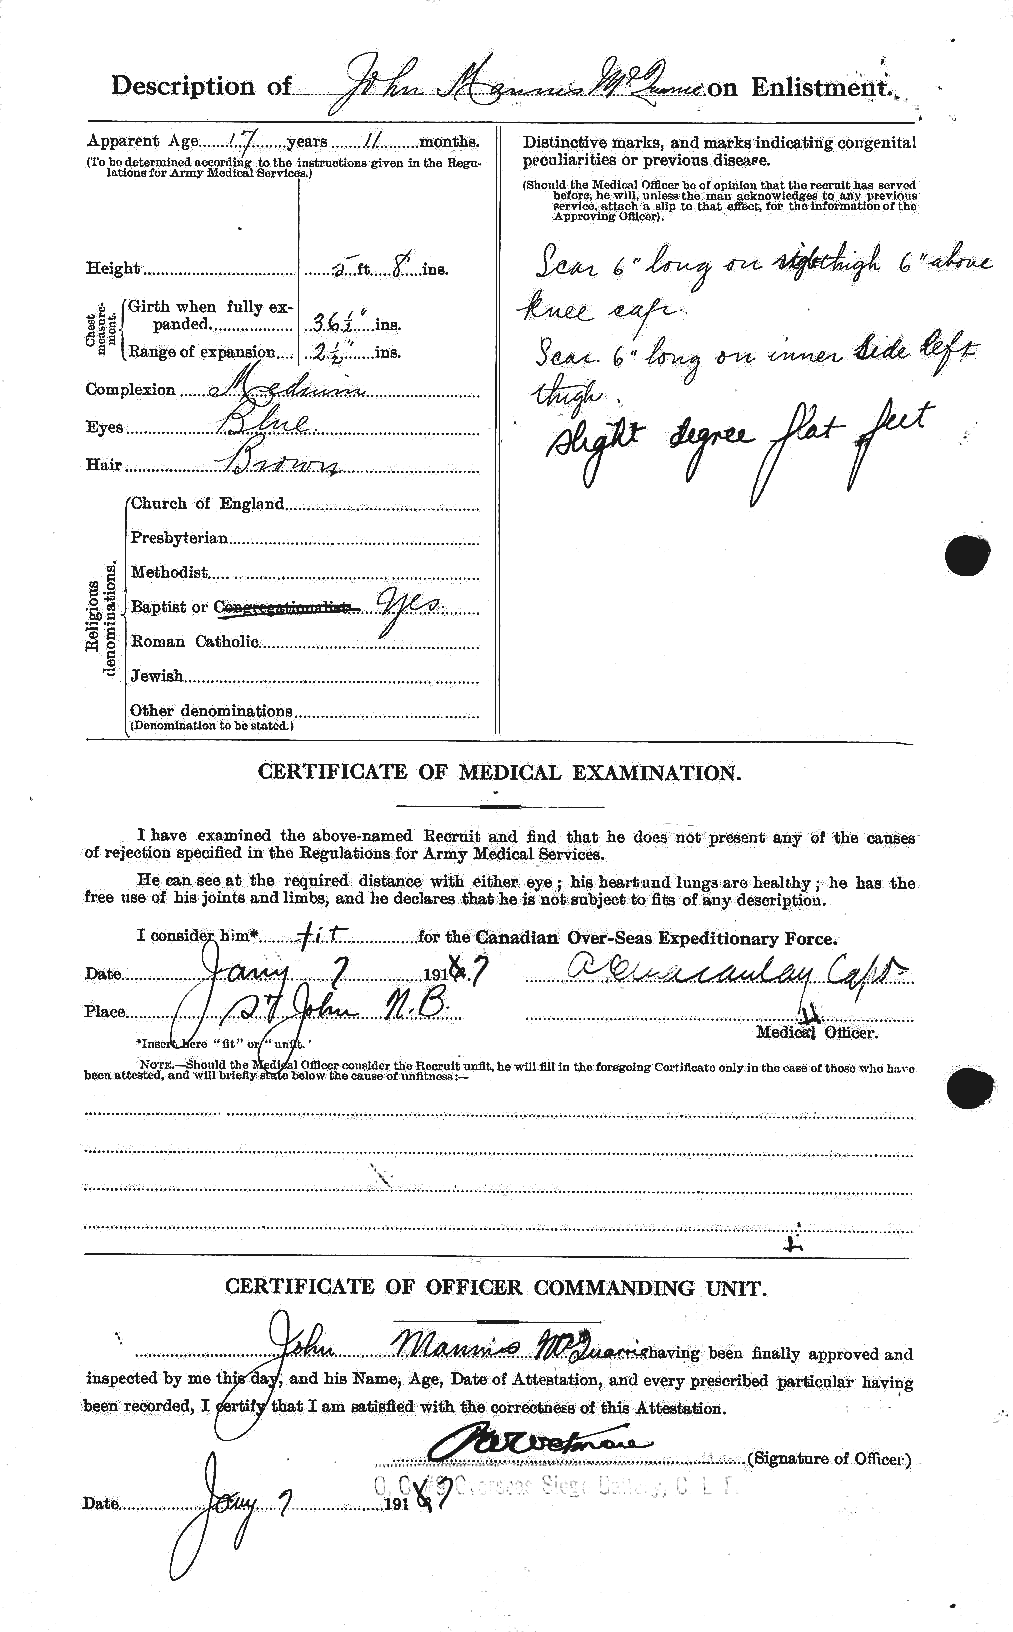 Personnel Records of the First World War - CEF 545826b